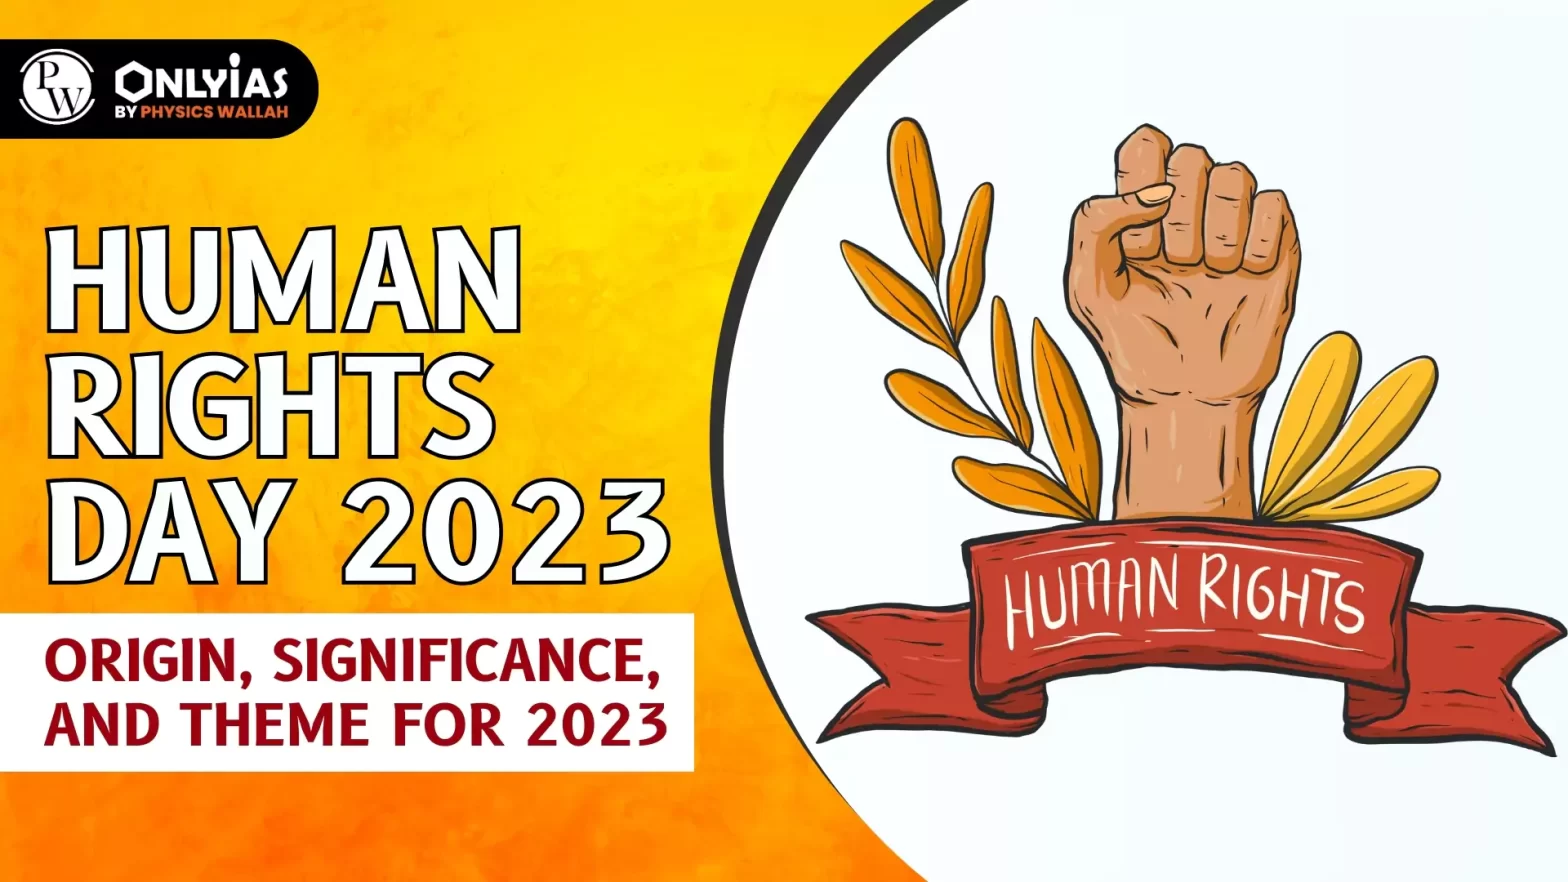 Human Rights Day 2023: Origin, Significance, and Theme for 2023